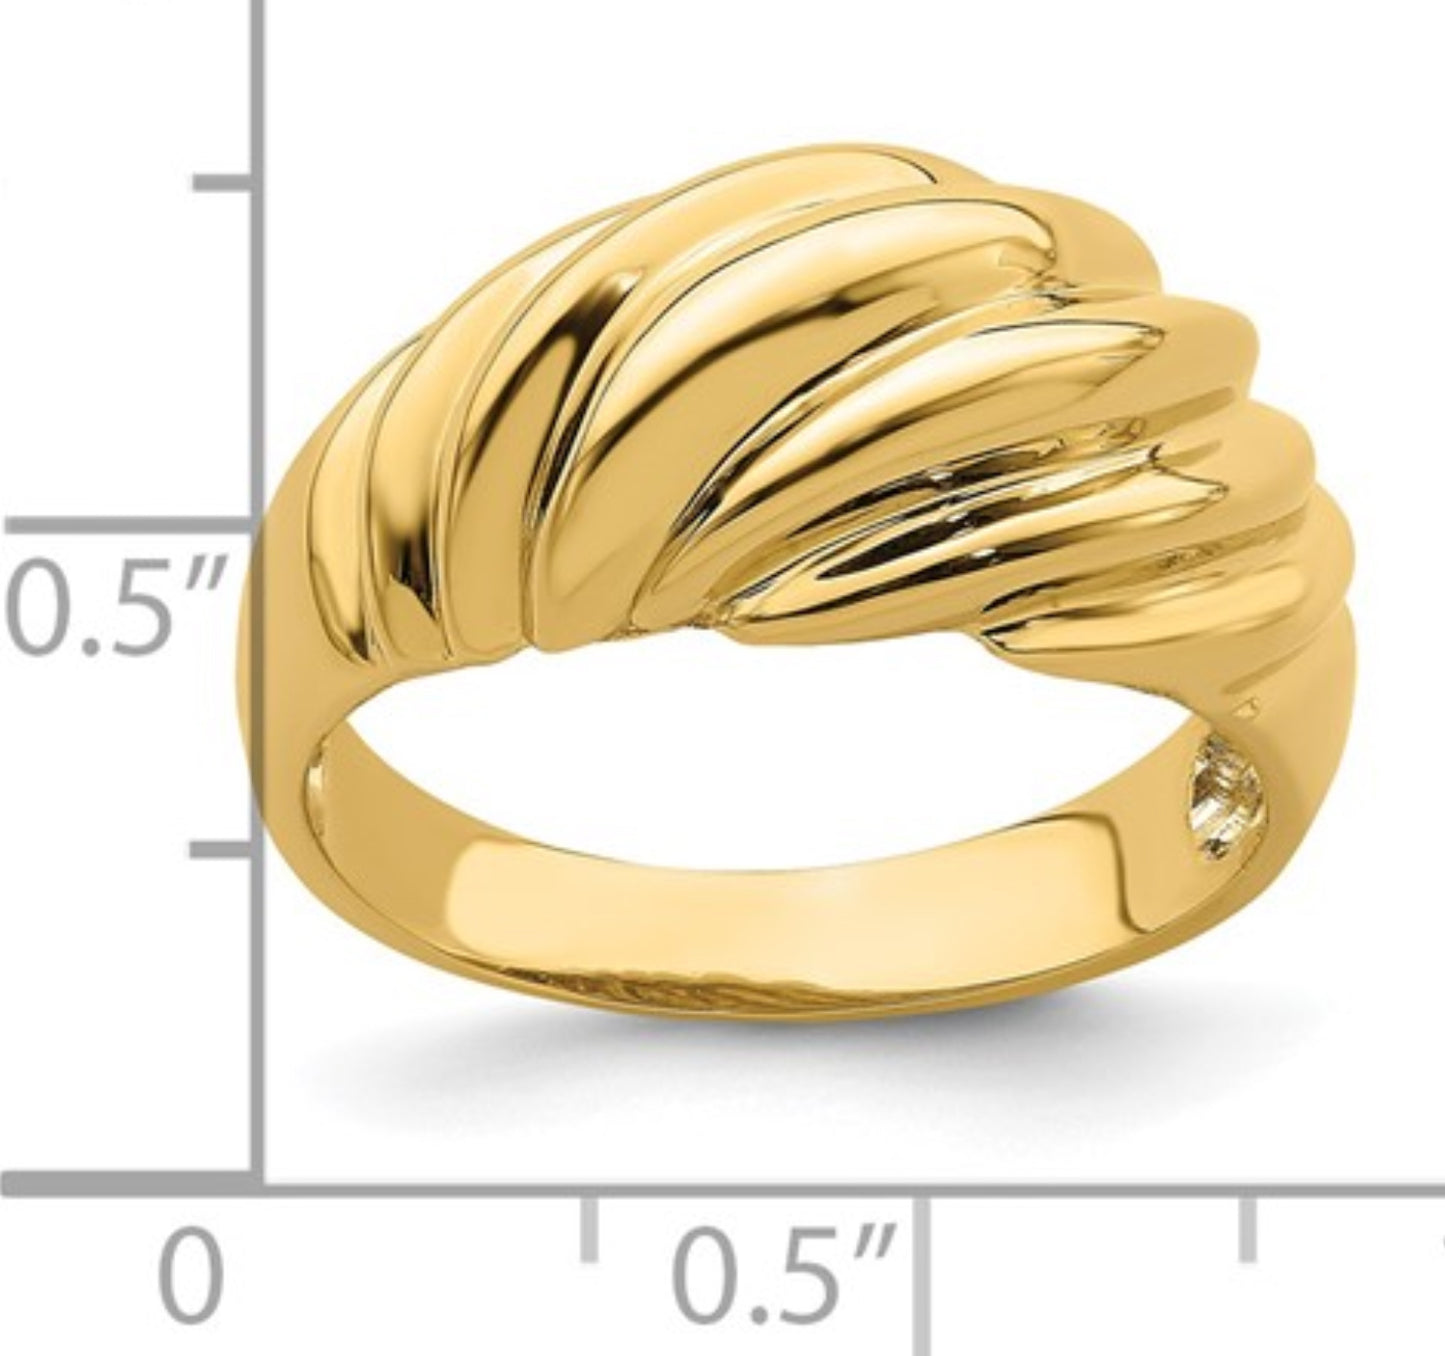 14k Yellow Gold Croissant Ring